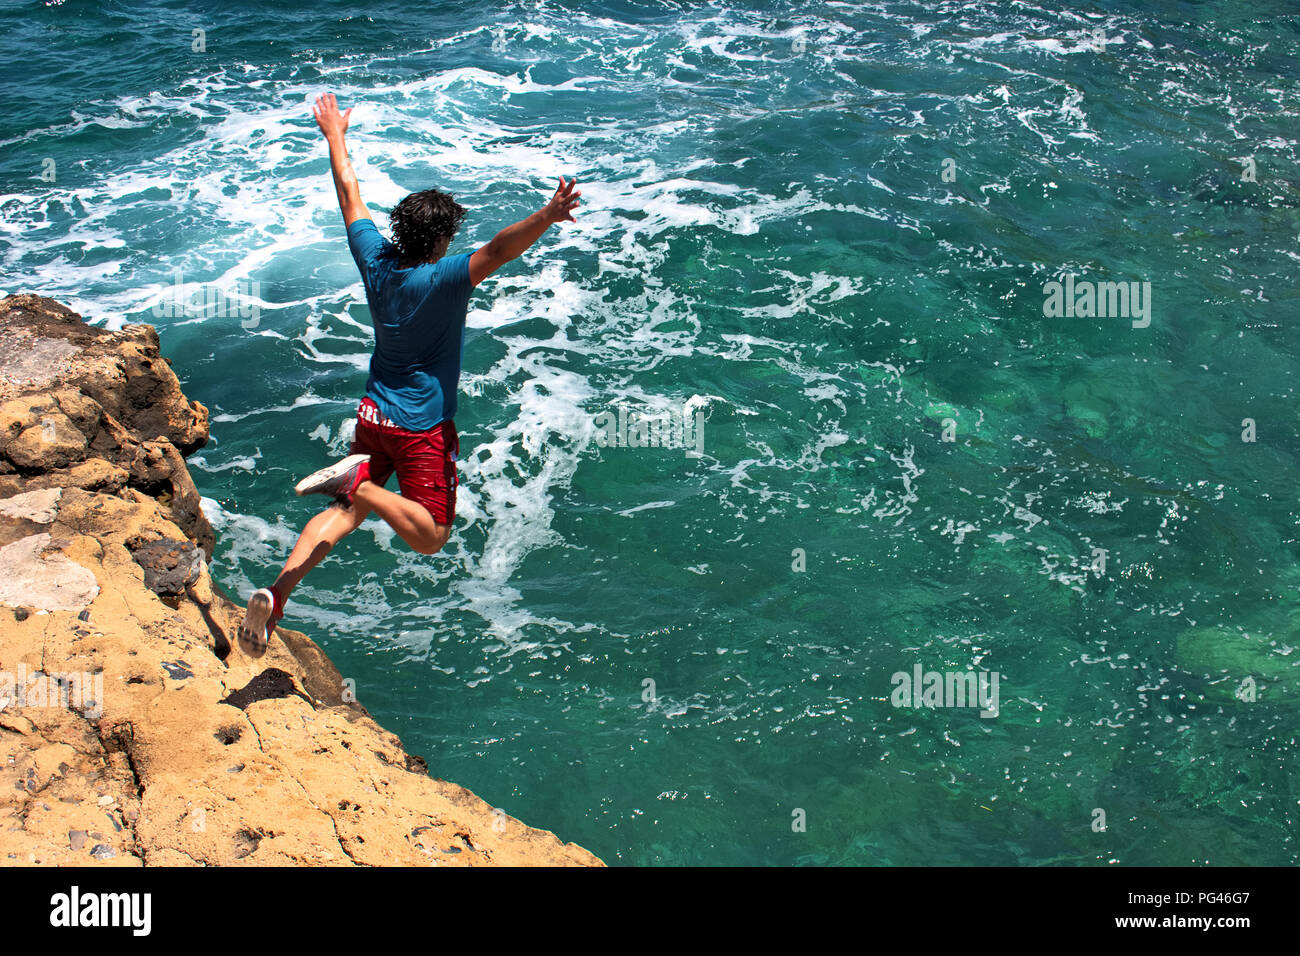 Ready to make the leap cliff jumping in Greece Freedom Stock Photo